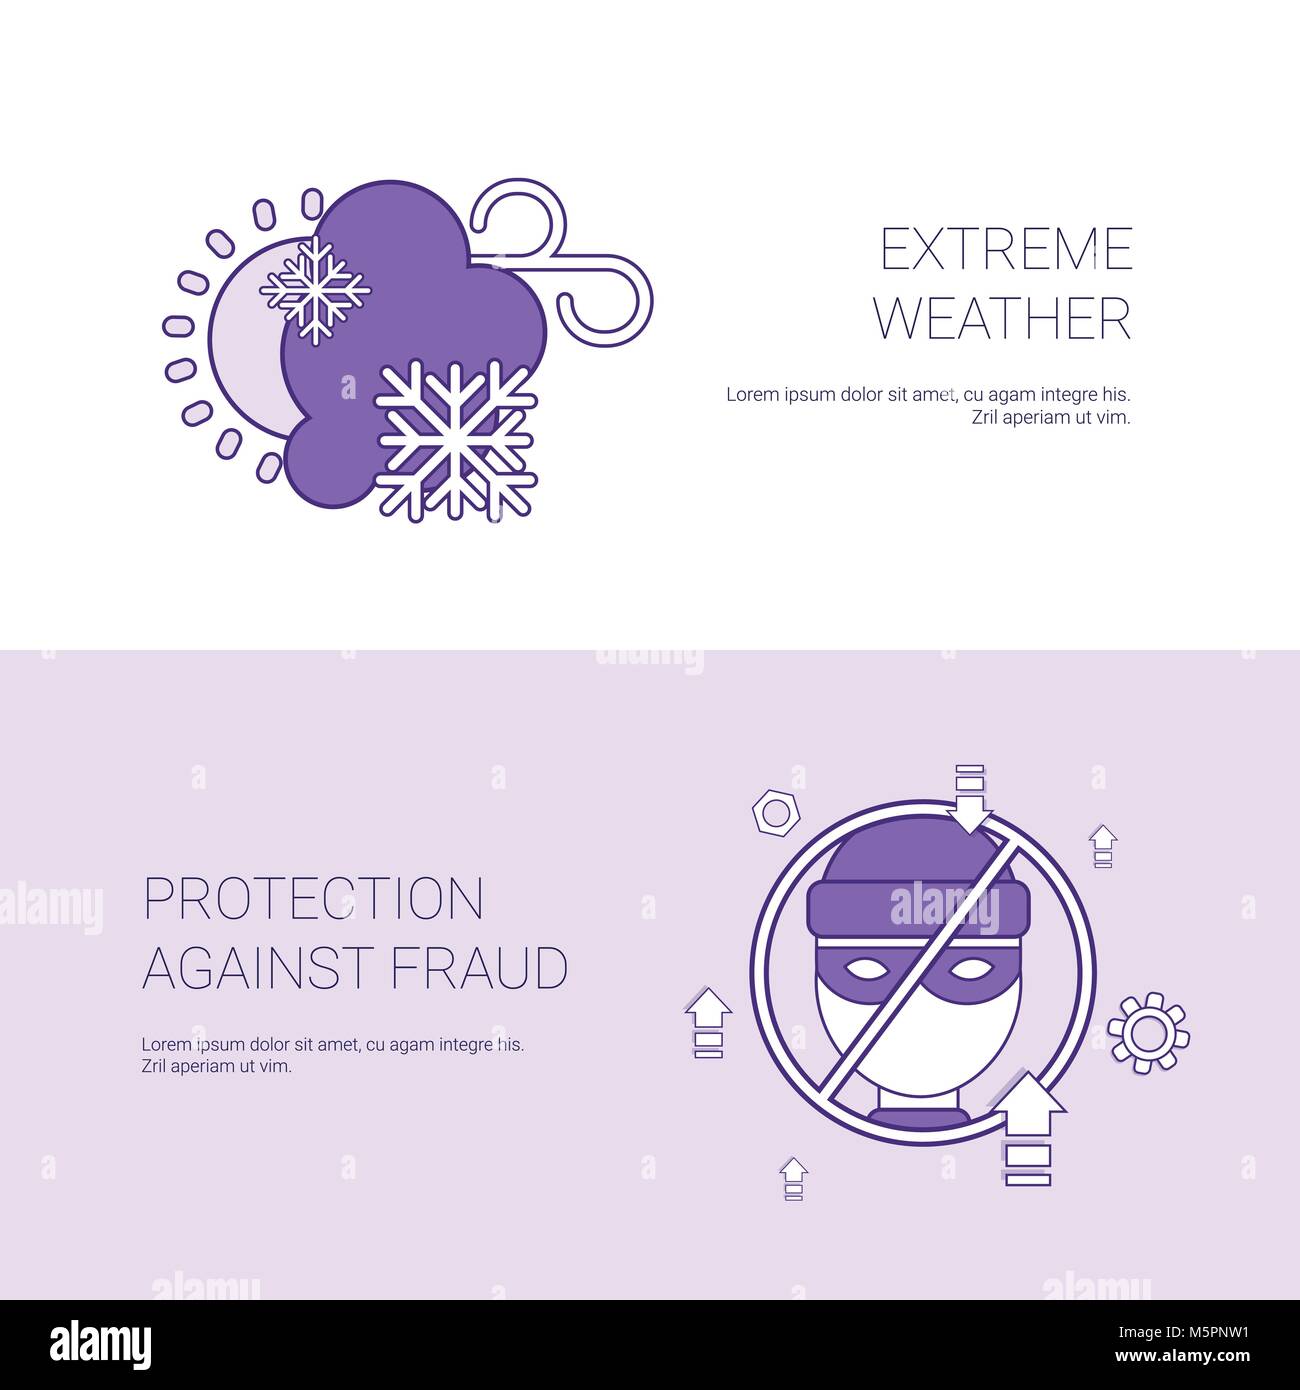 Extreme Weater And Protection Against Fraud Concept Template Web Banner With Copy Space Stock Vector